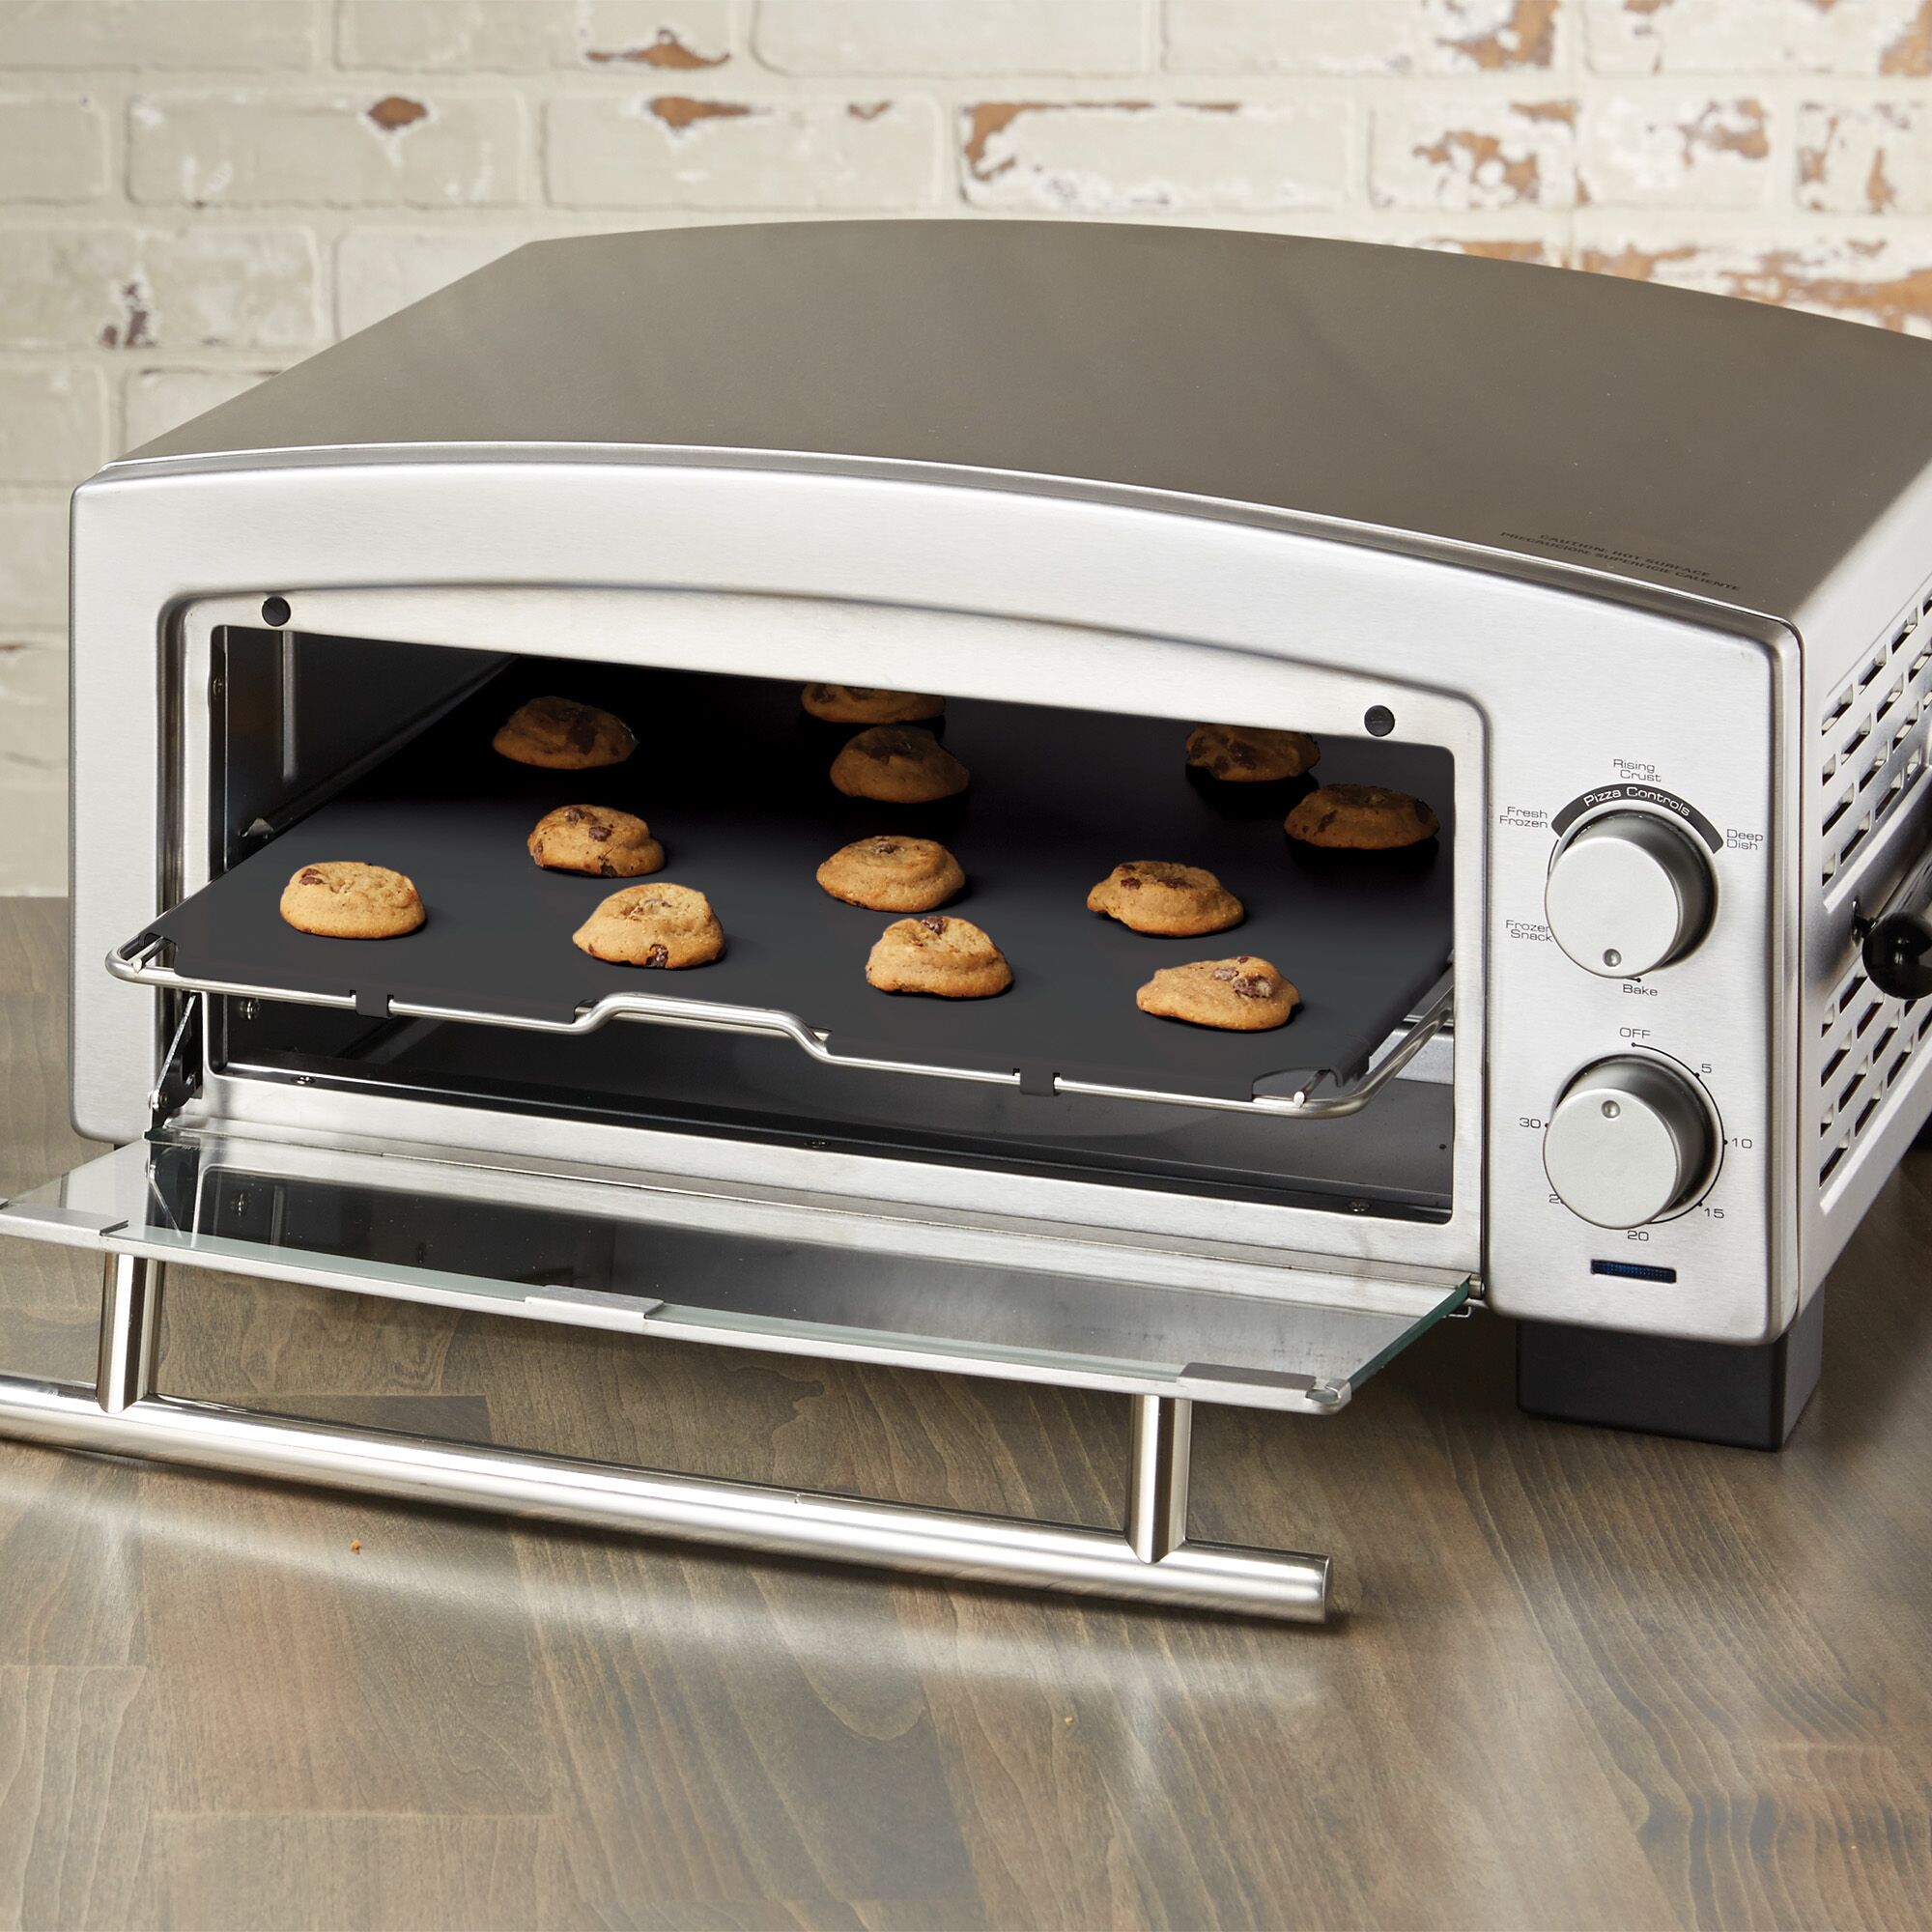 A tray of baked cookies inside 5 minute pizza oven and snack maker.